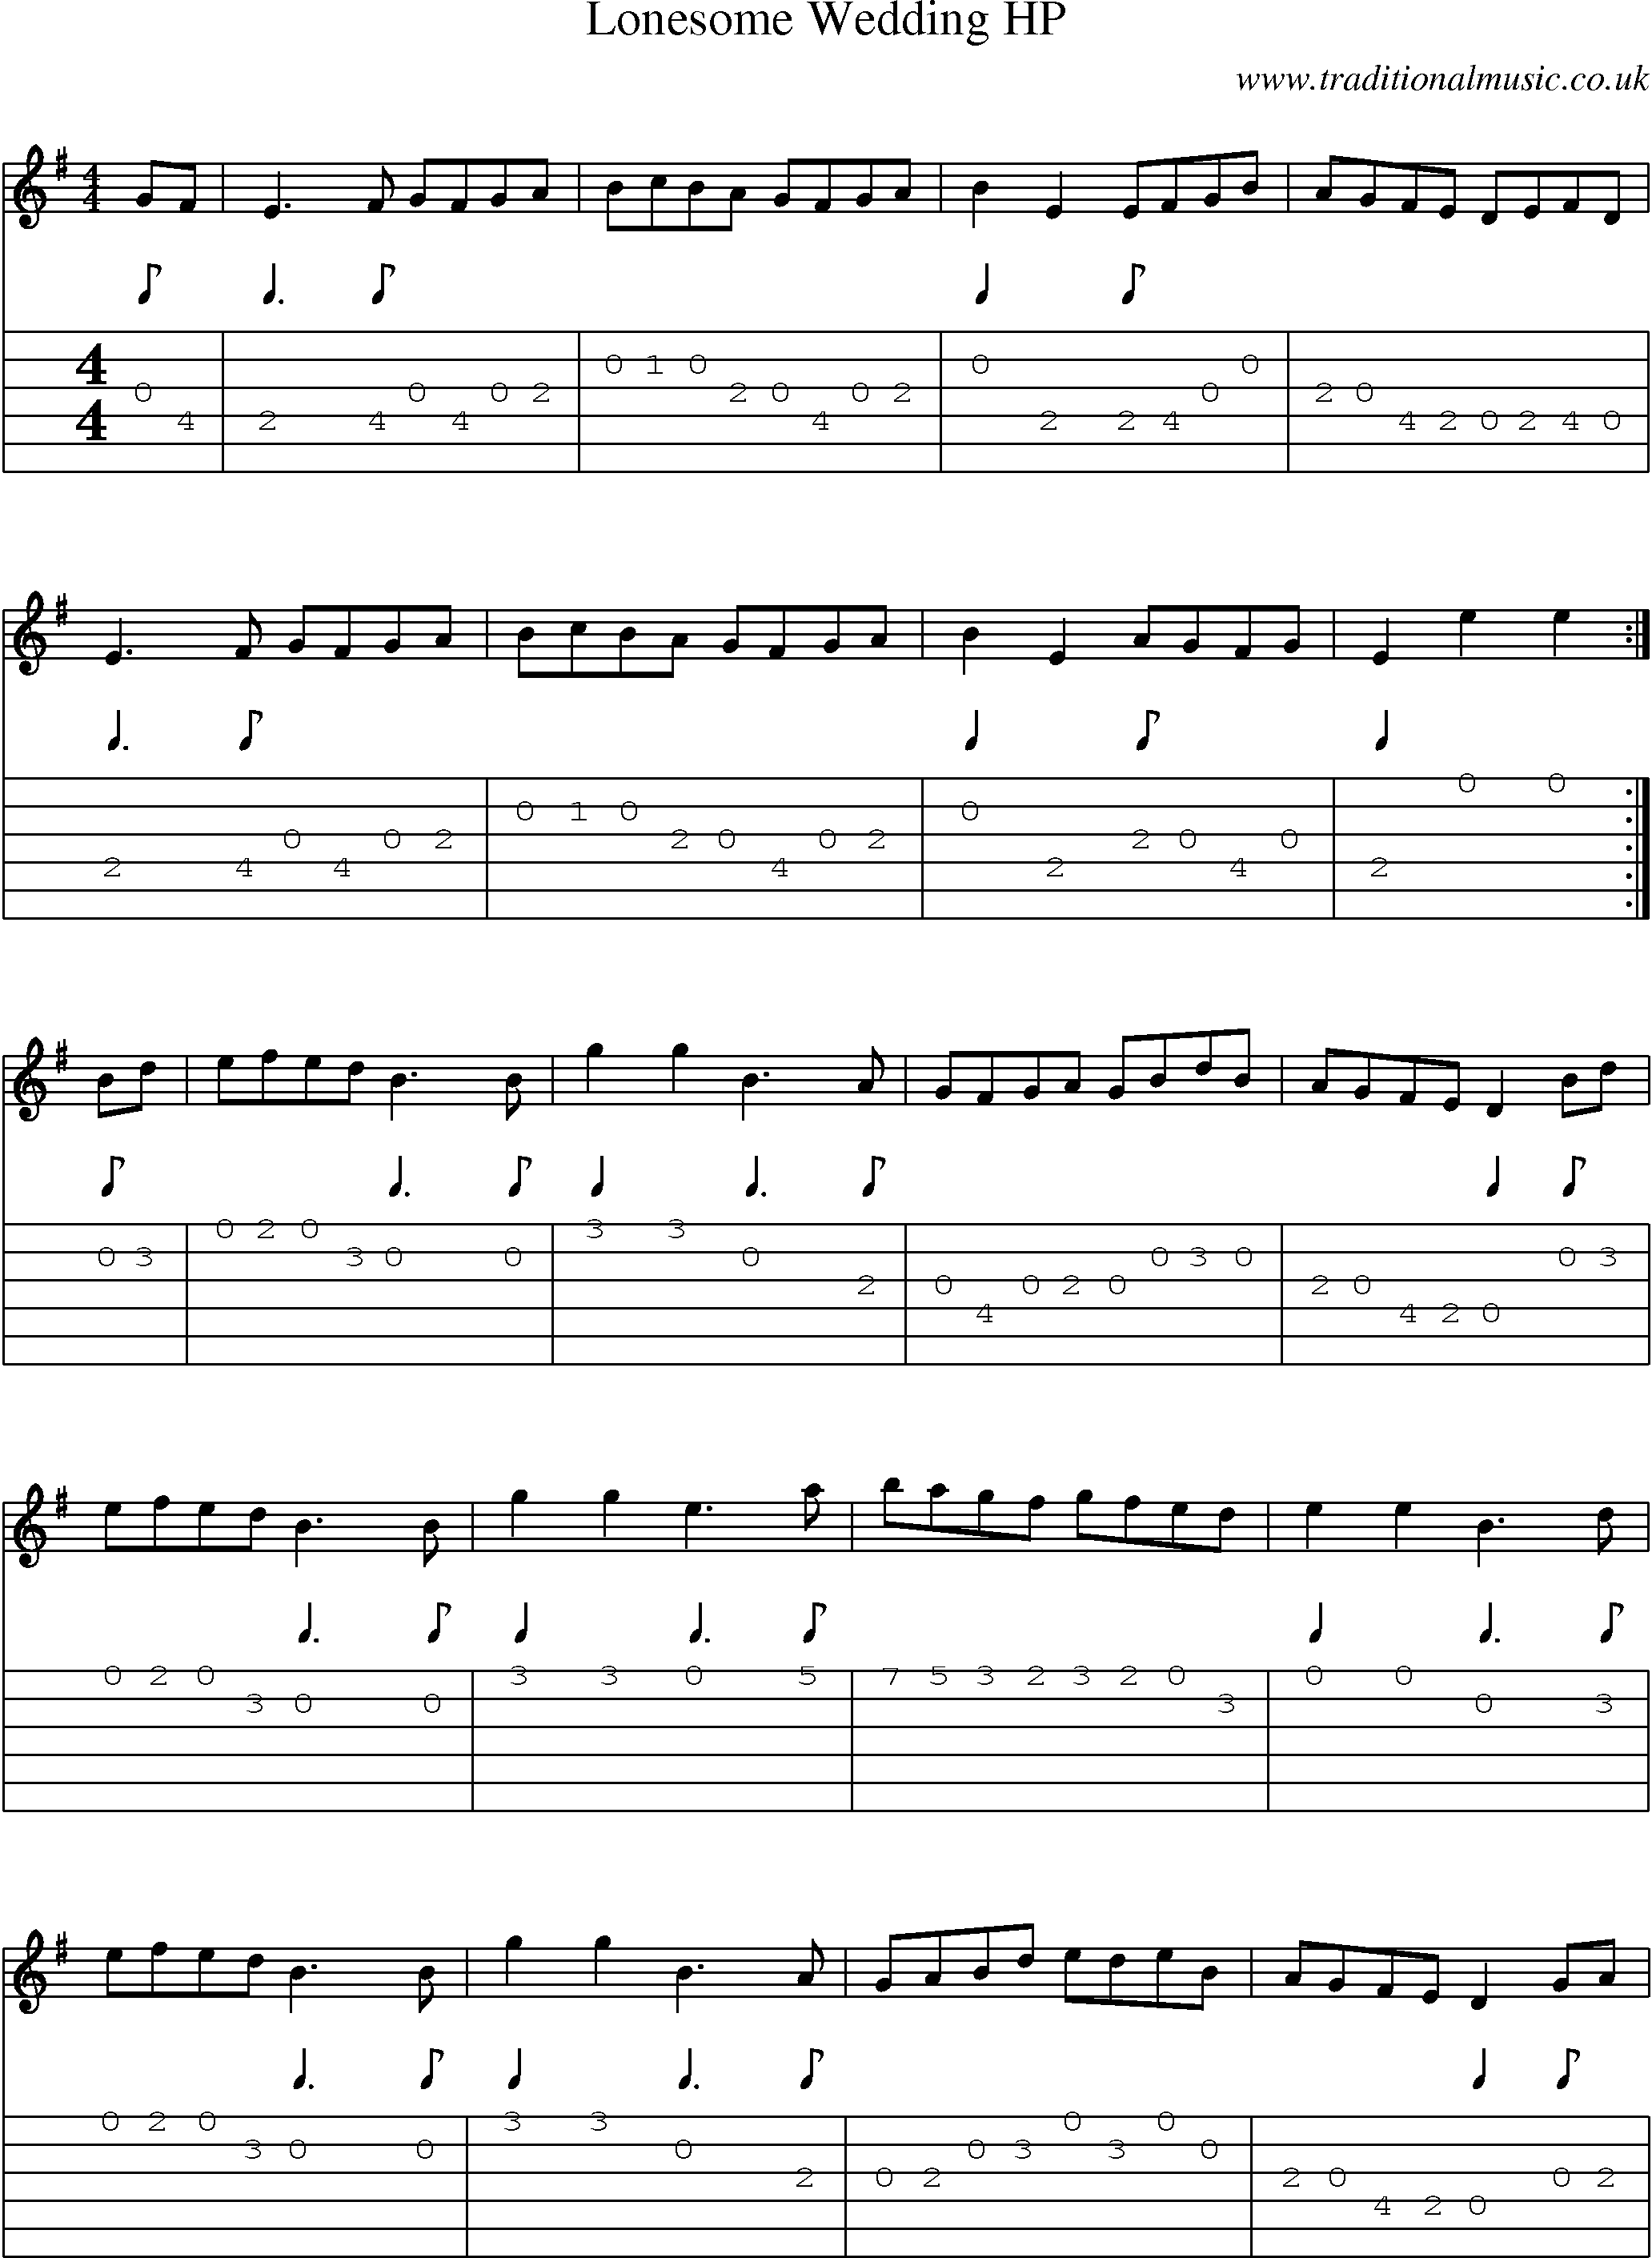 Music Score and Guitar Tabs for Lonesome Wedding